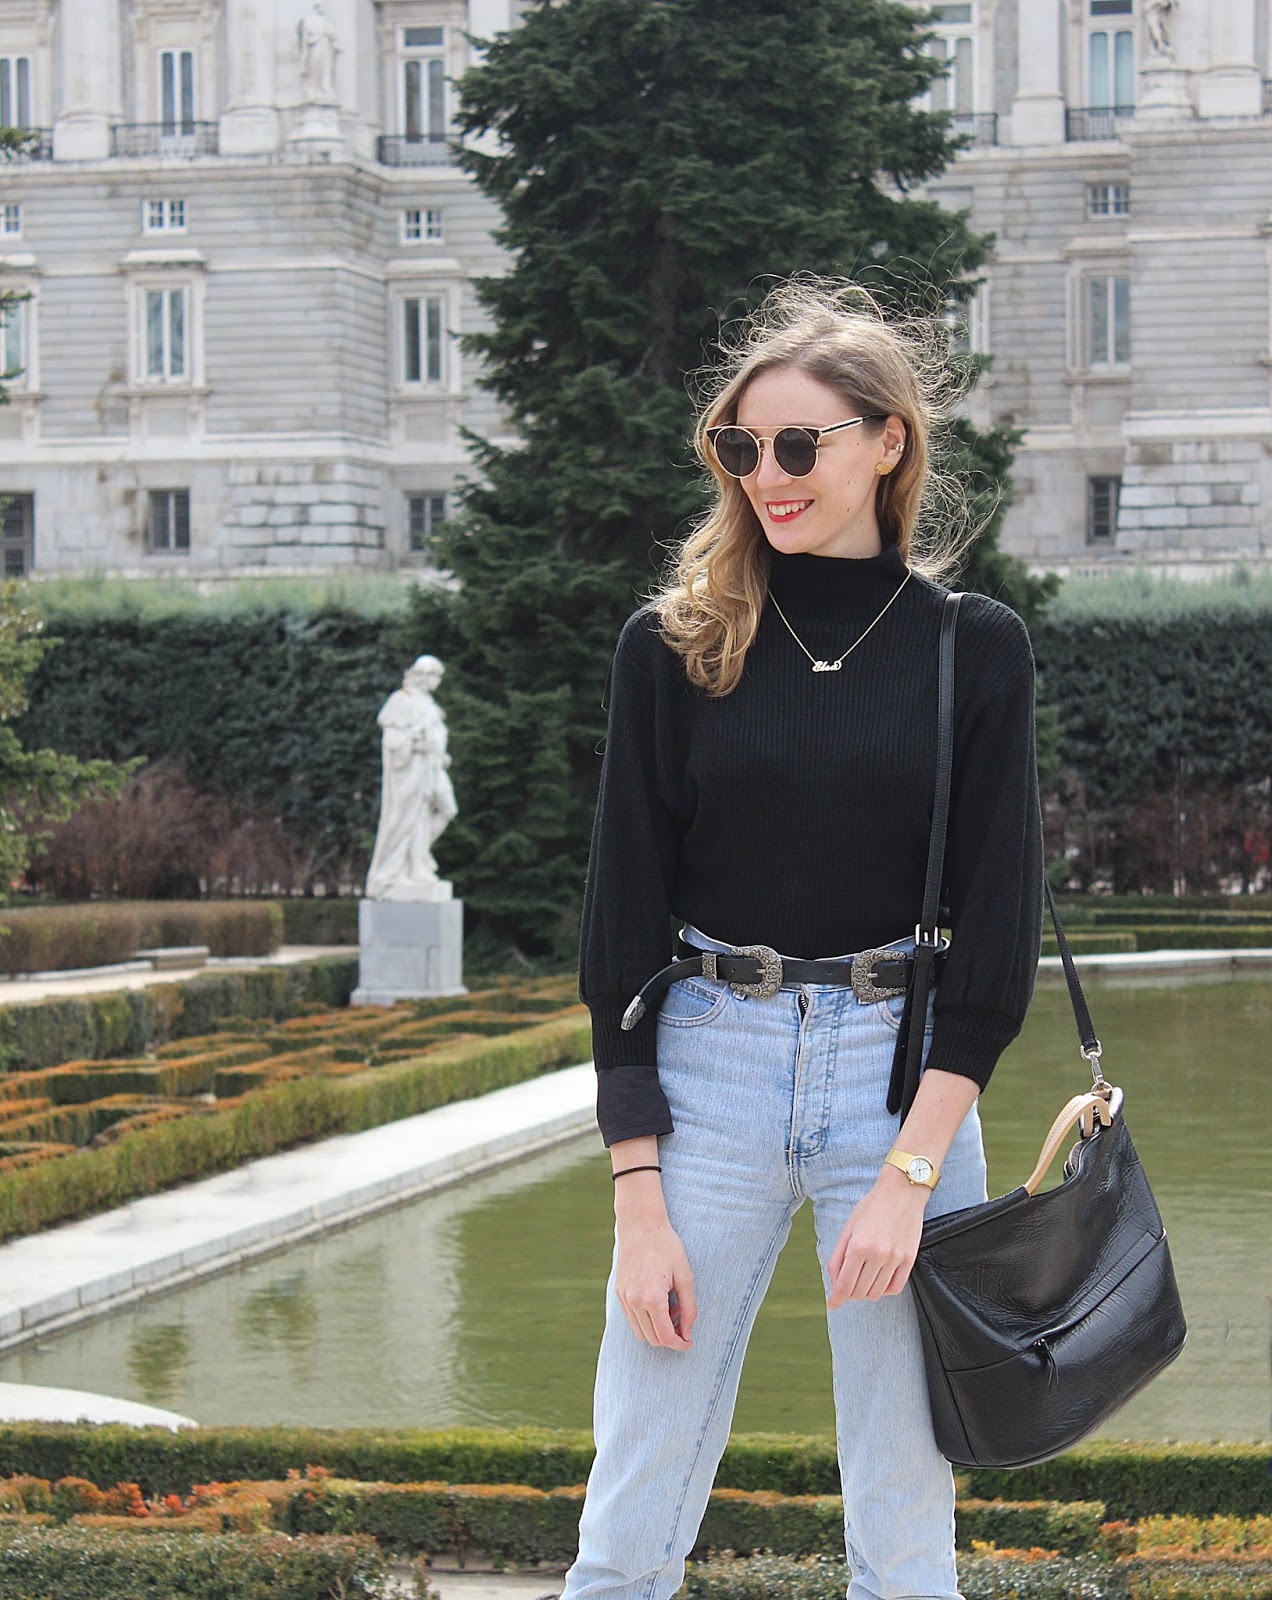 street-style-mom-jeans-militar-guess-boots-tblack-turtle-neck-zaful